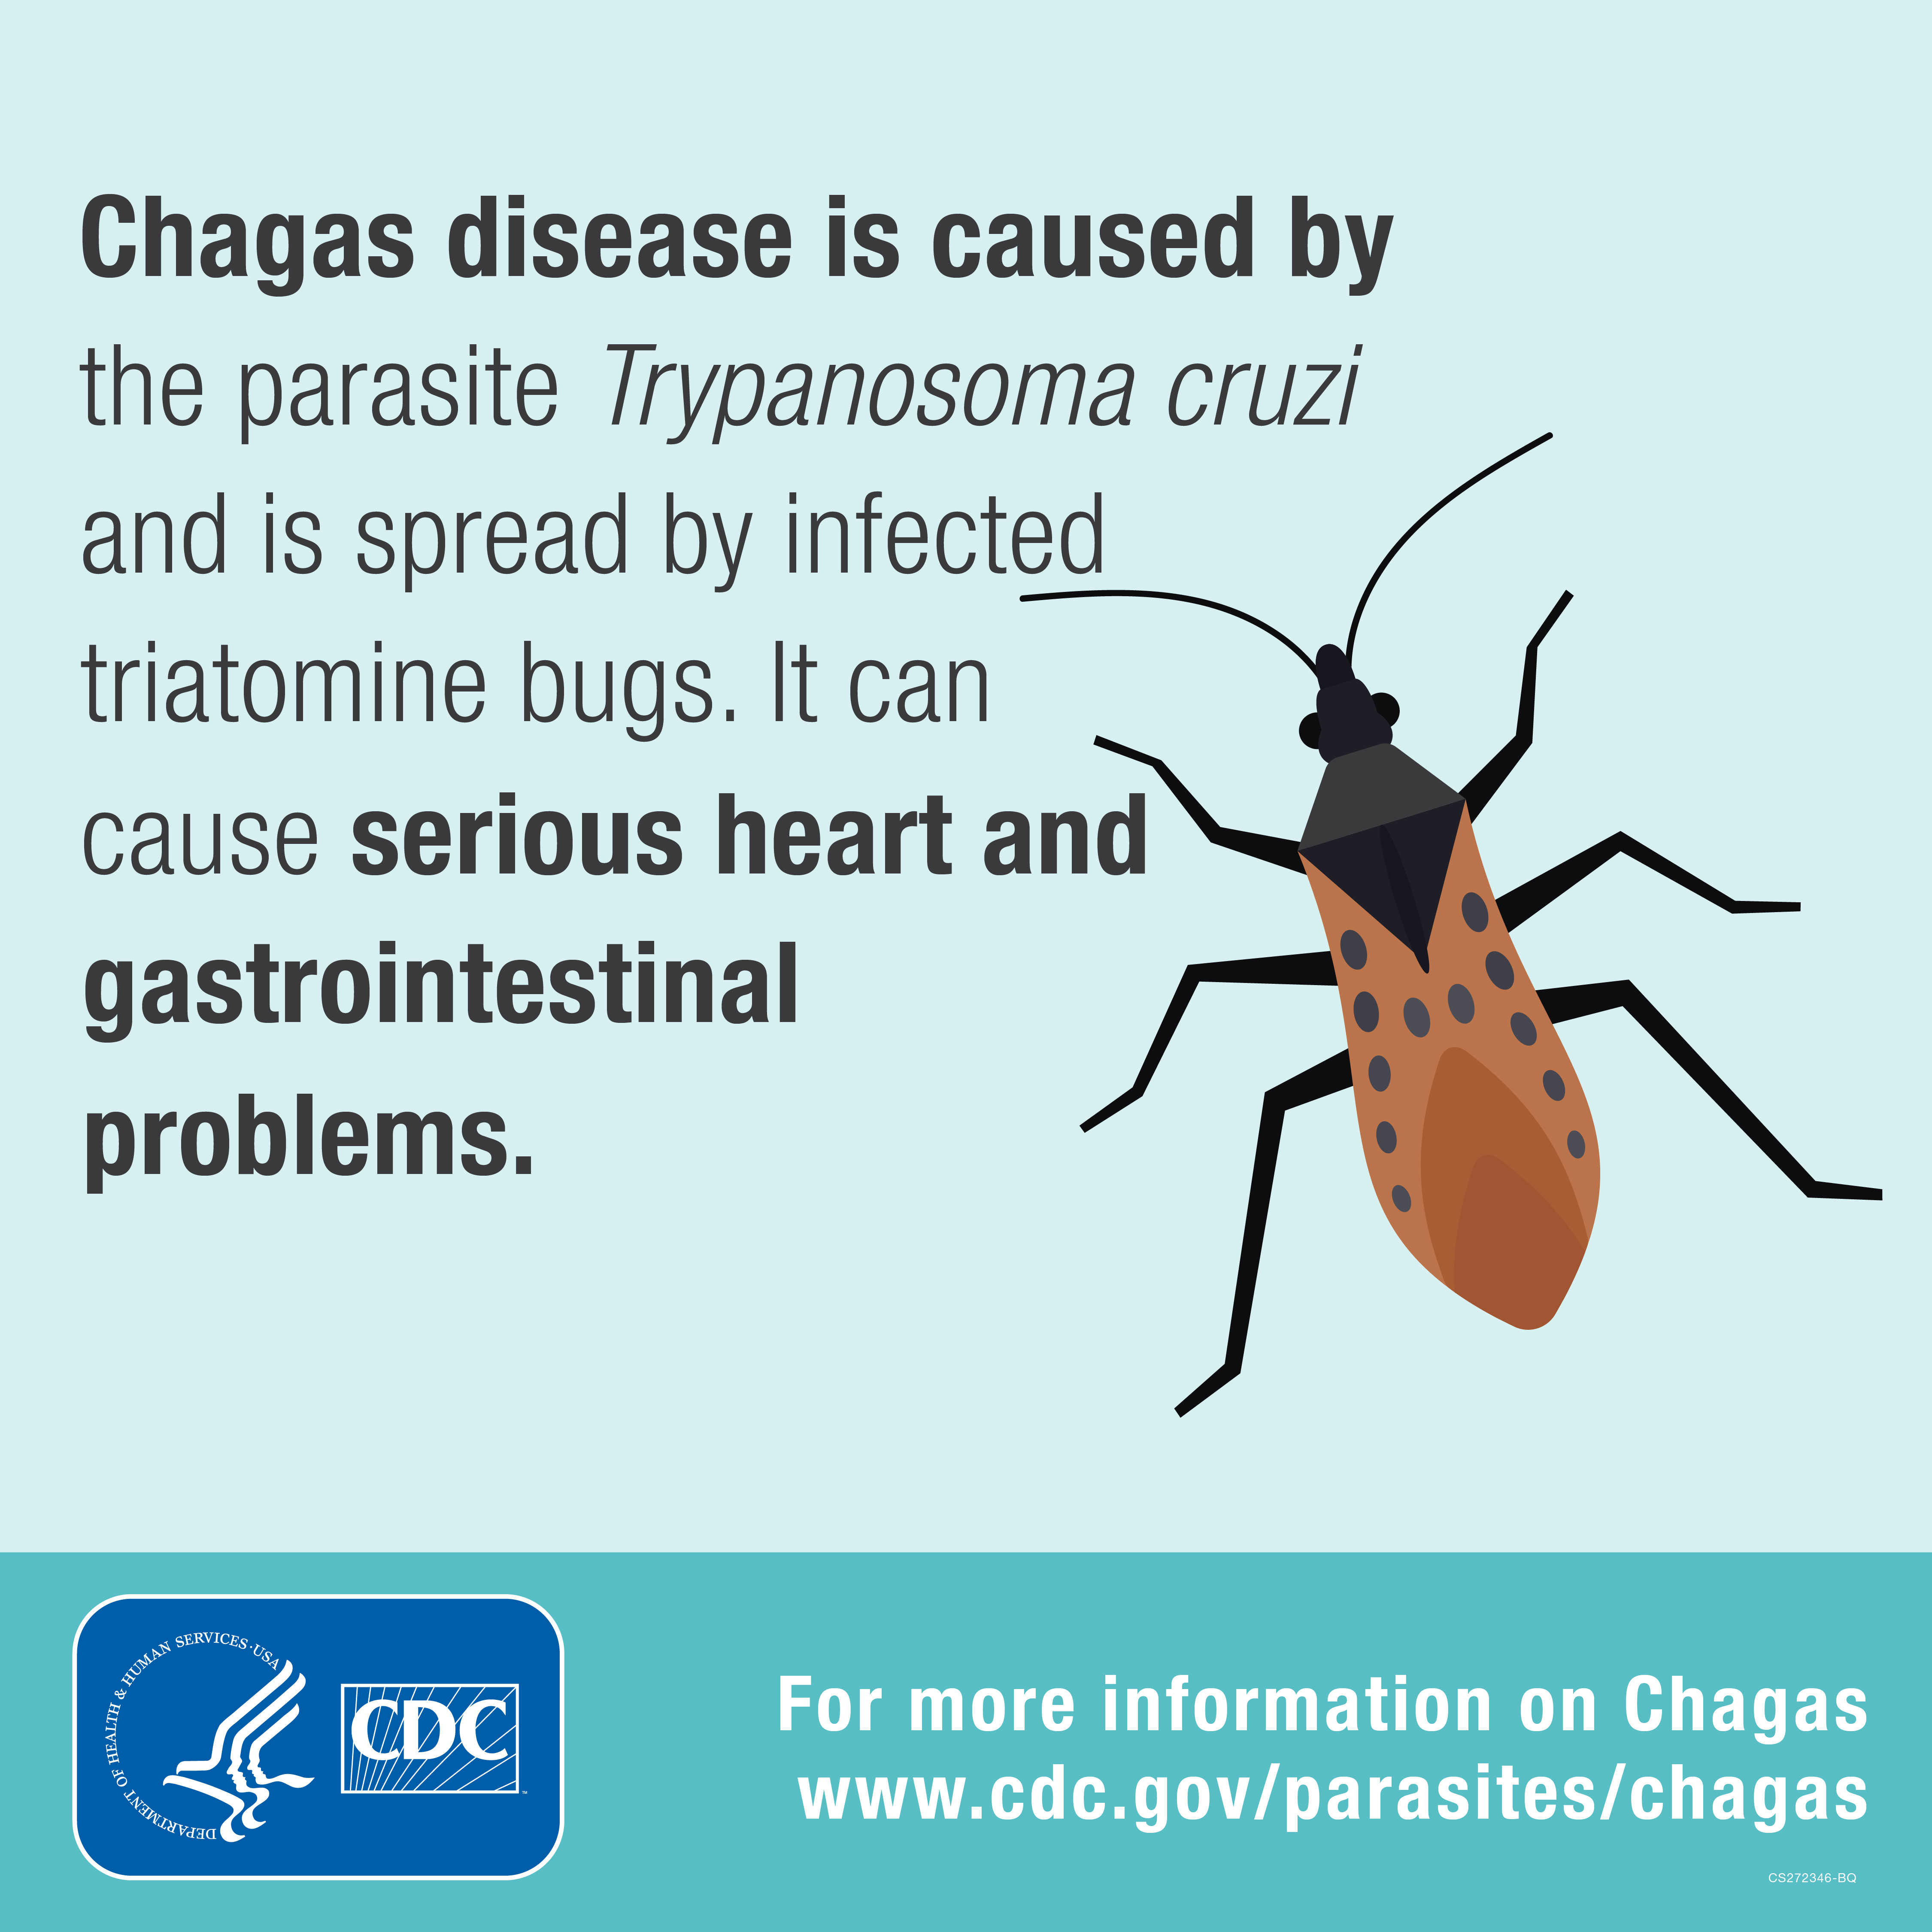 Chagas disease is cased by the parastie Trypanosoma Cruzi and is spread by infected triatomine bugs. It can cause serious heart and gastrointestinal problems.